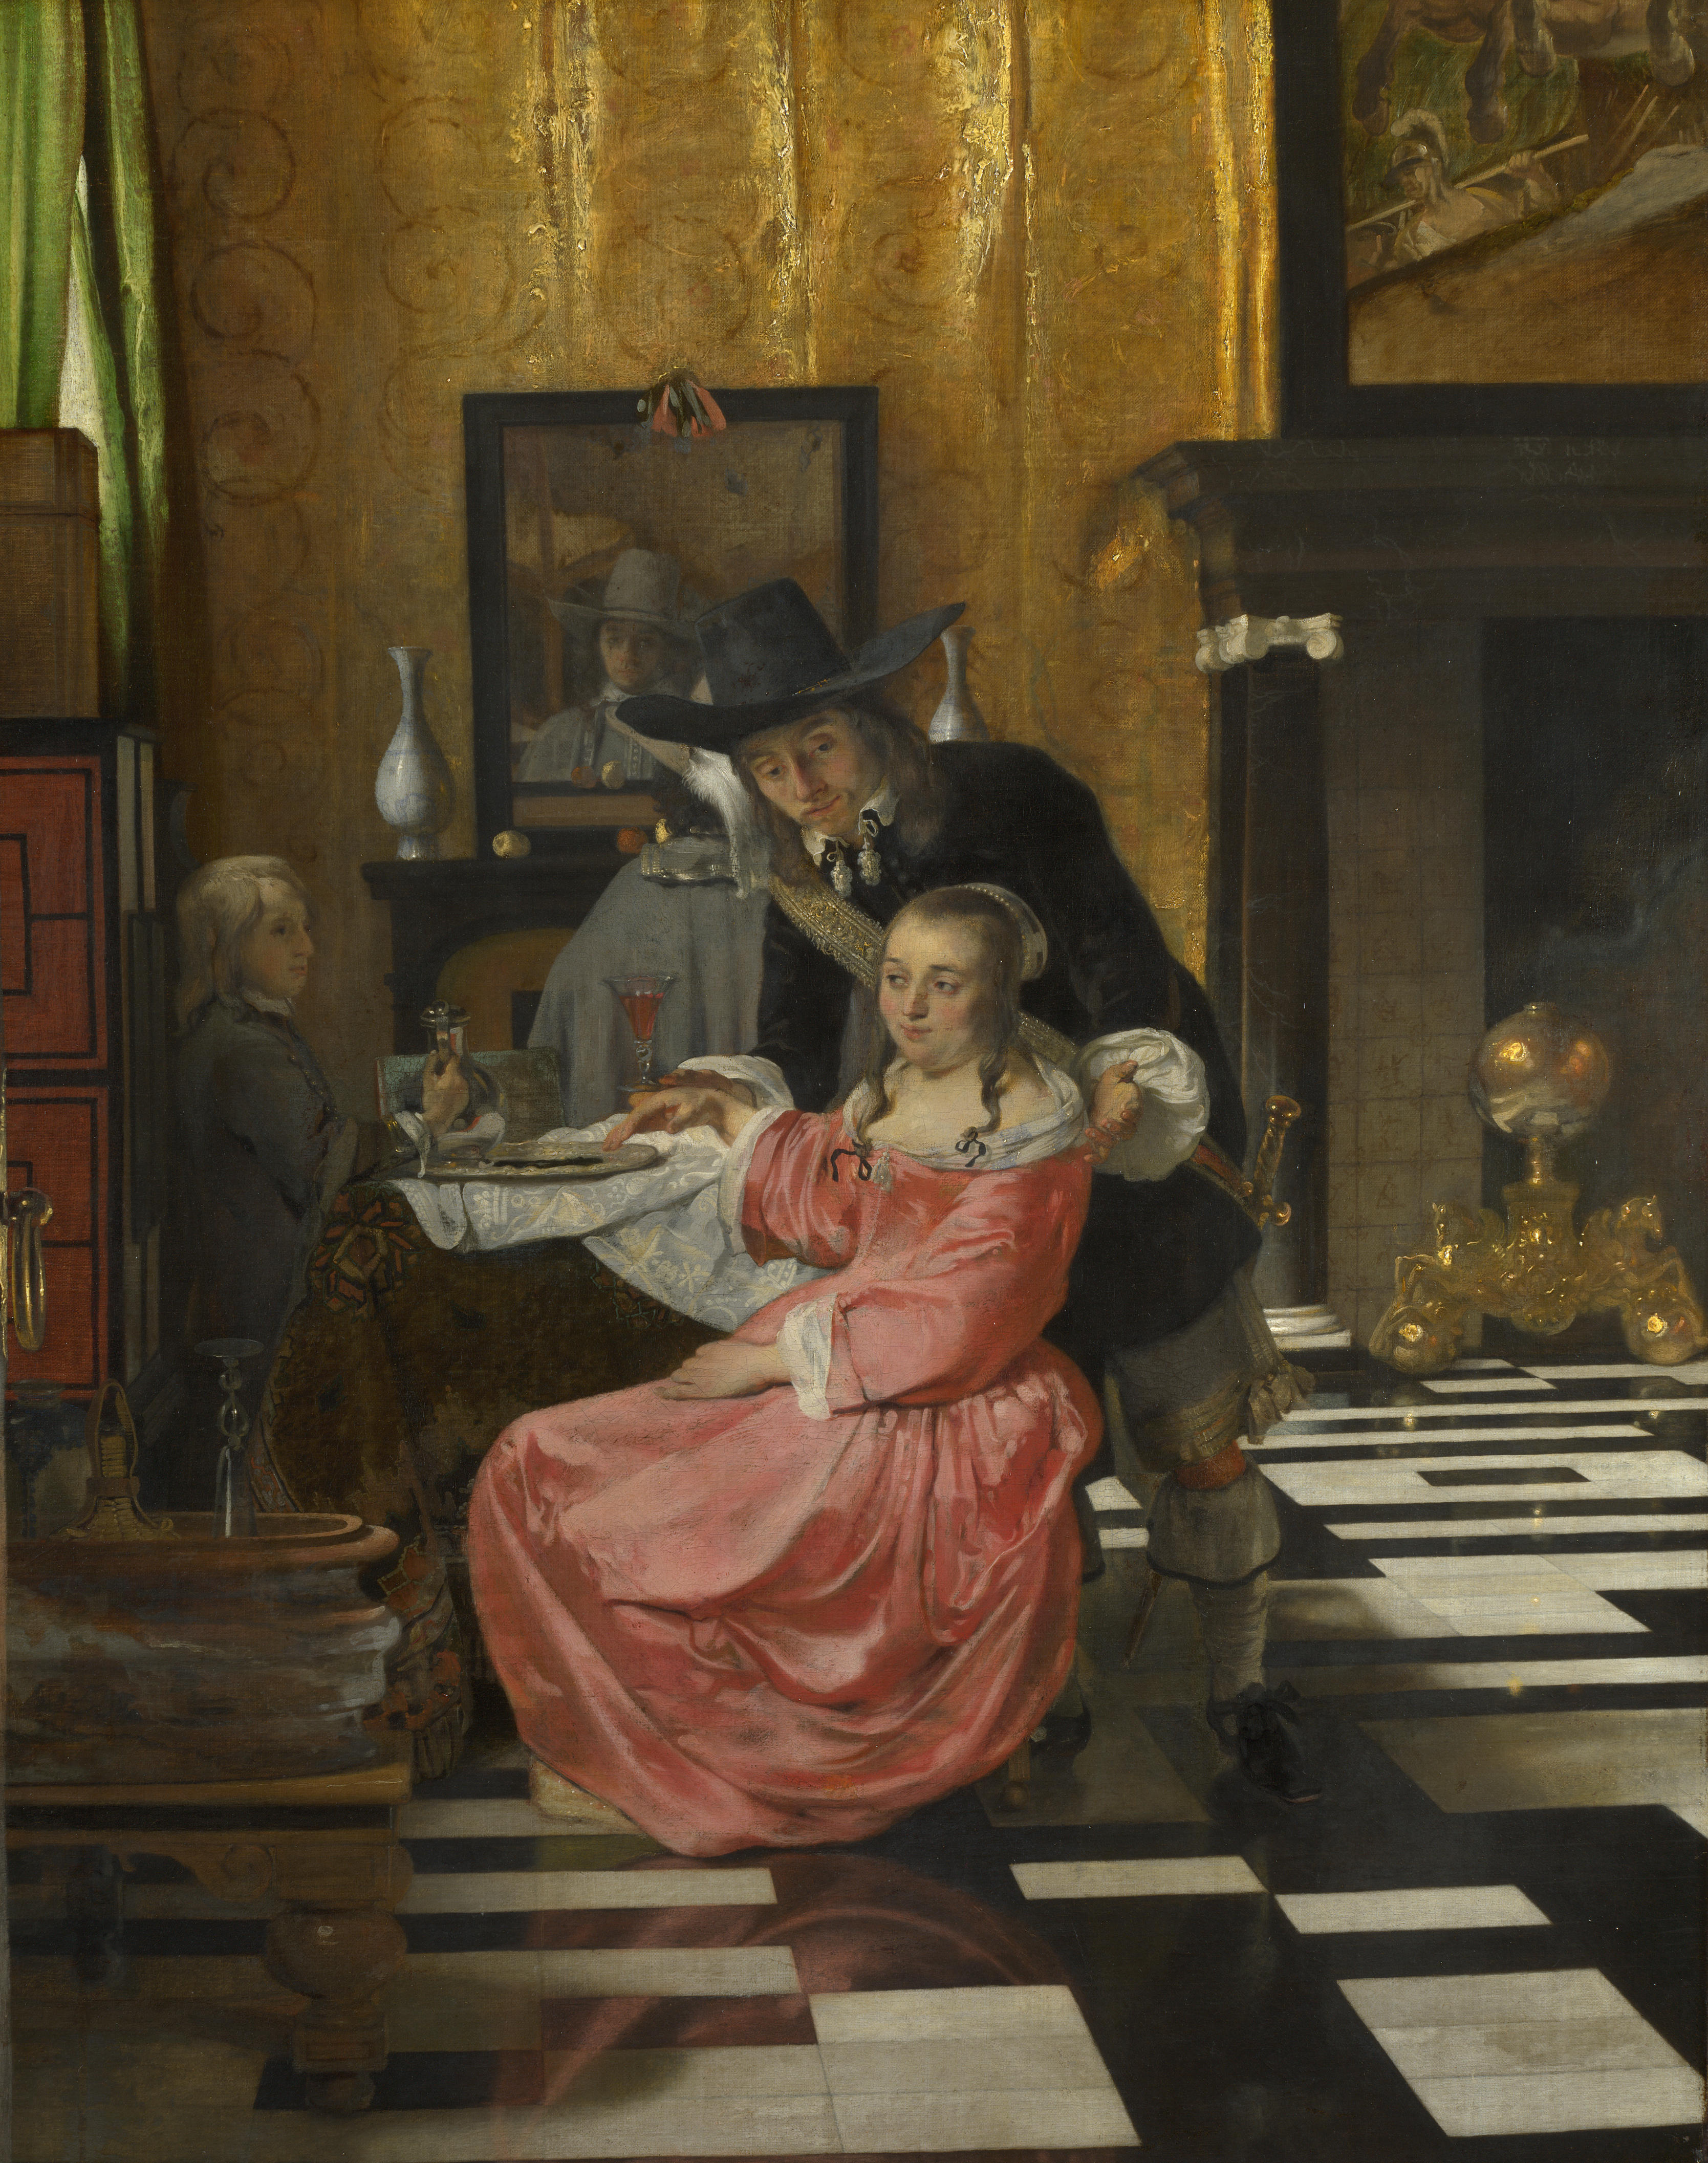 Full title: An Interior, with a Woman refusing a Glass of Wine Artist: Delft Date made: probably 1660-5 Source: http://www.nationalgalleryimages.co.uk/ Contact: picture.library@nationalgallery.co.uk Copyright © The National Gallery, London